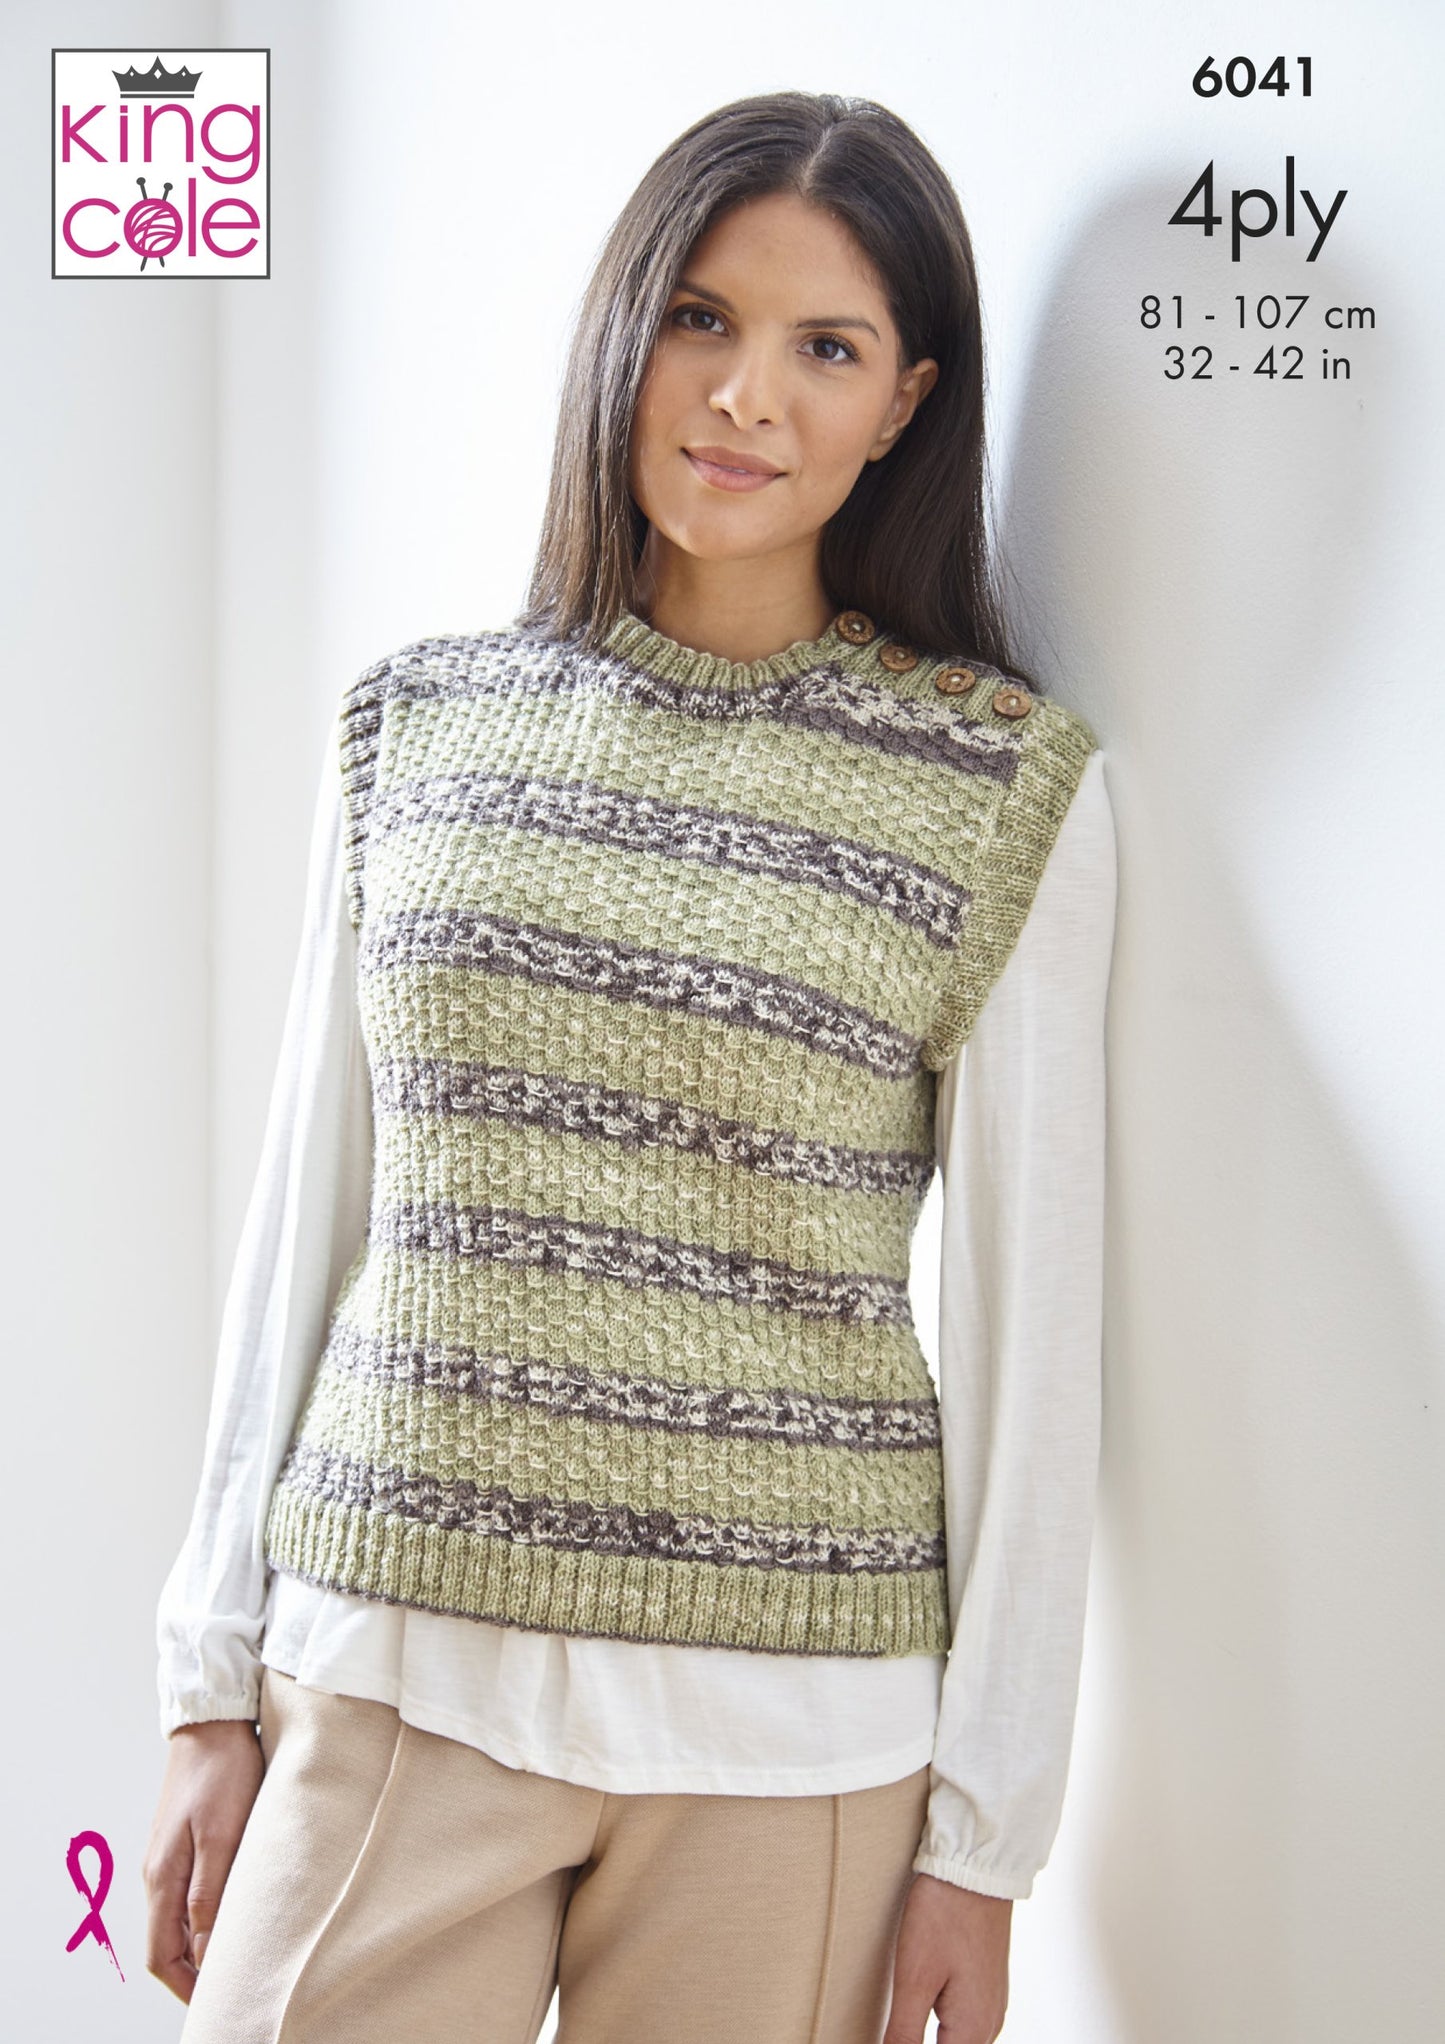 Knitting Pattern 6041 - Pullover & Top Knitted in Norse 4Ply